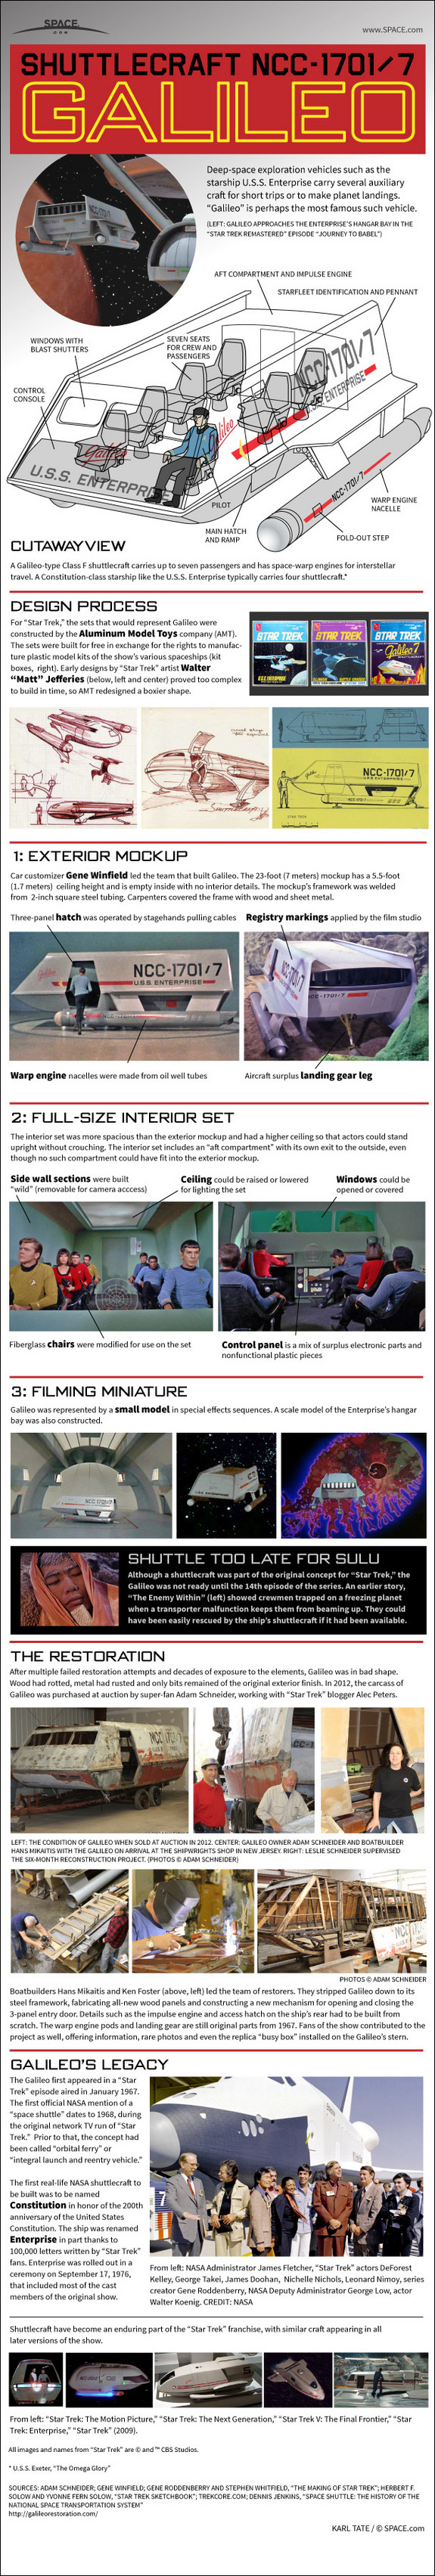 Find out all about Star Trek's Galileo shuttlecraft in this SPACE.com infographic.